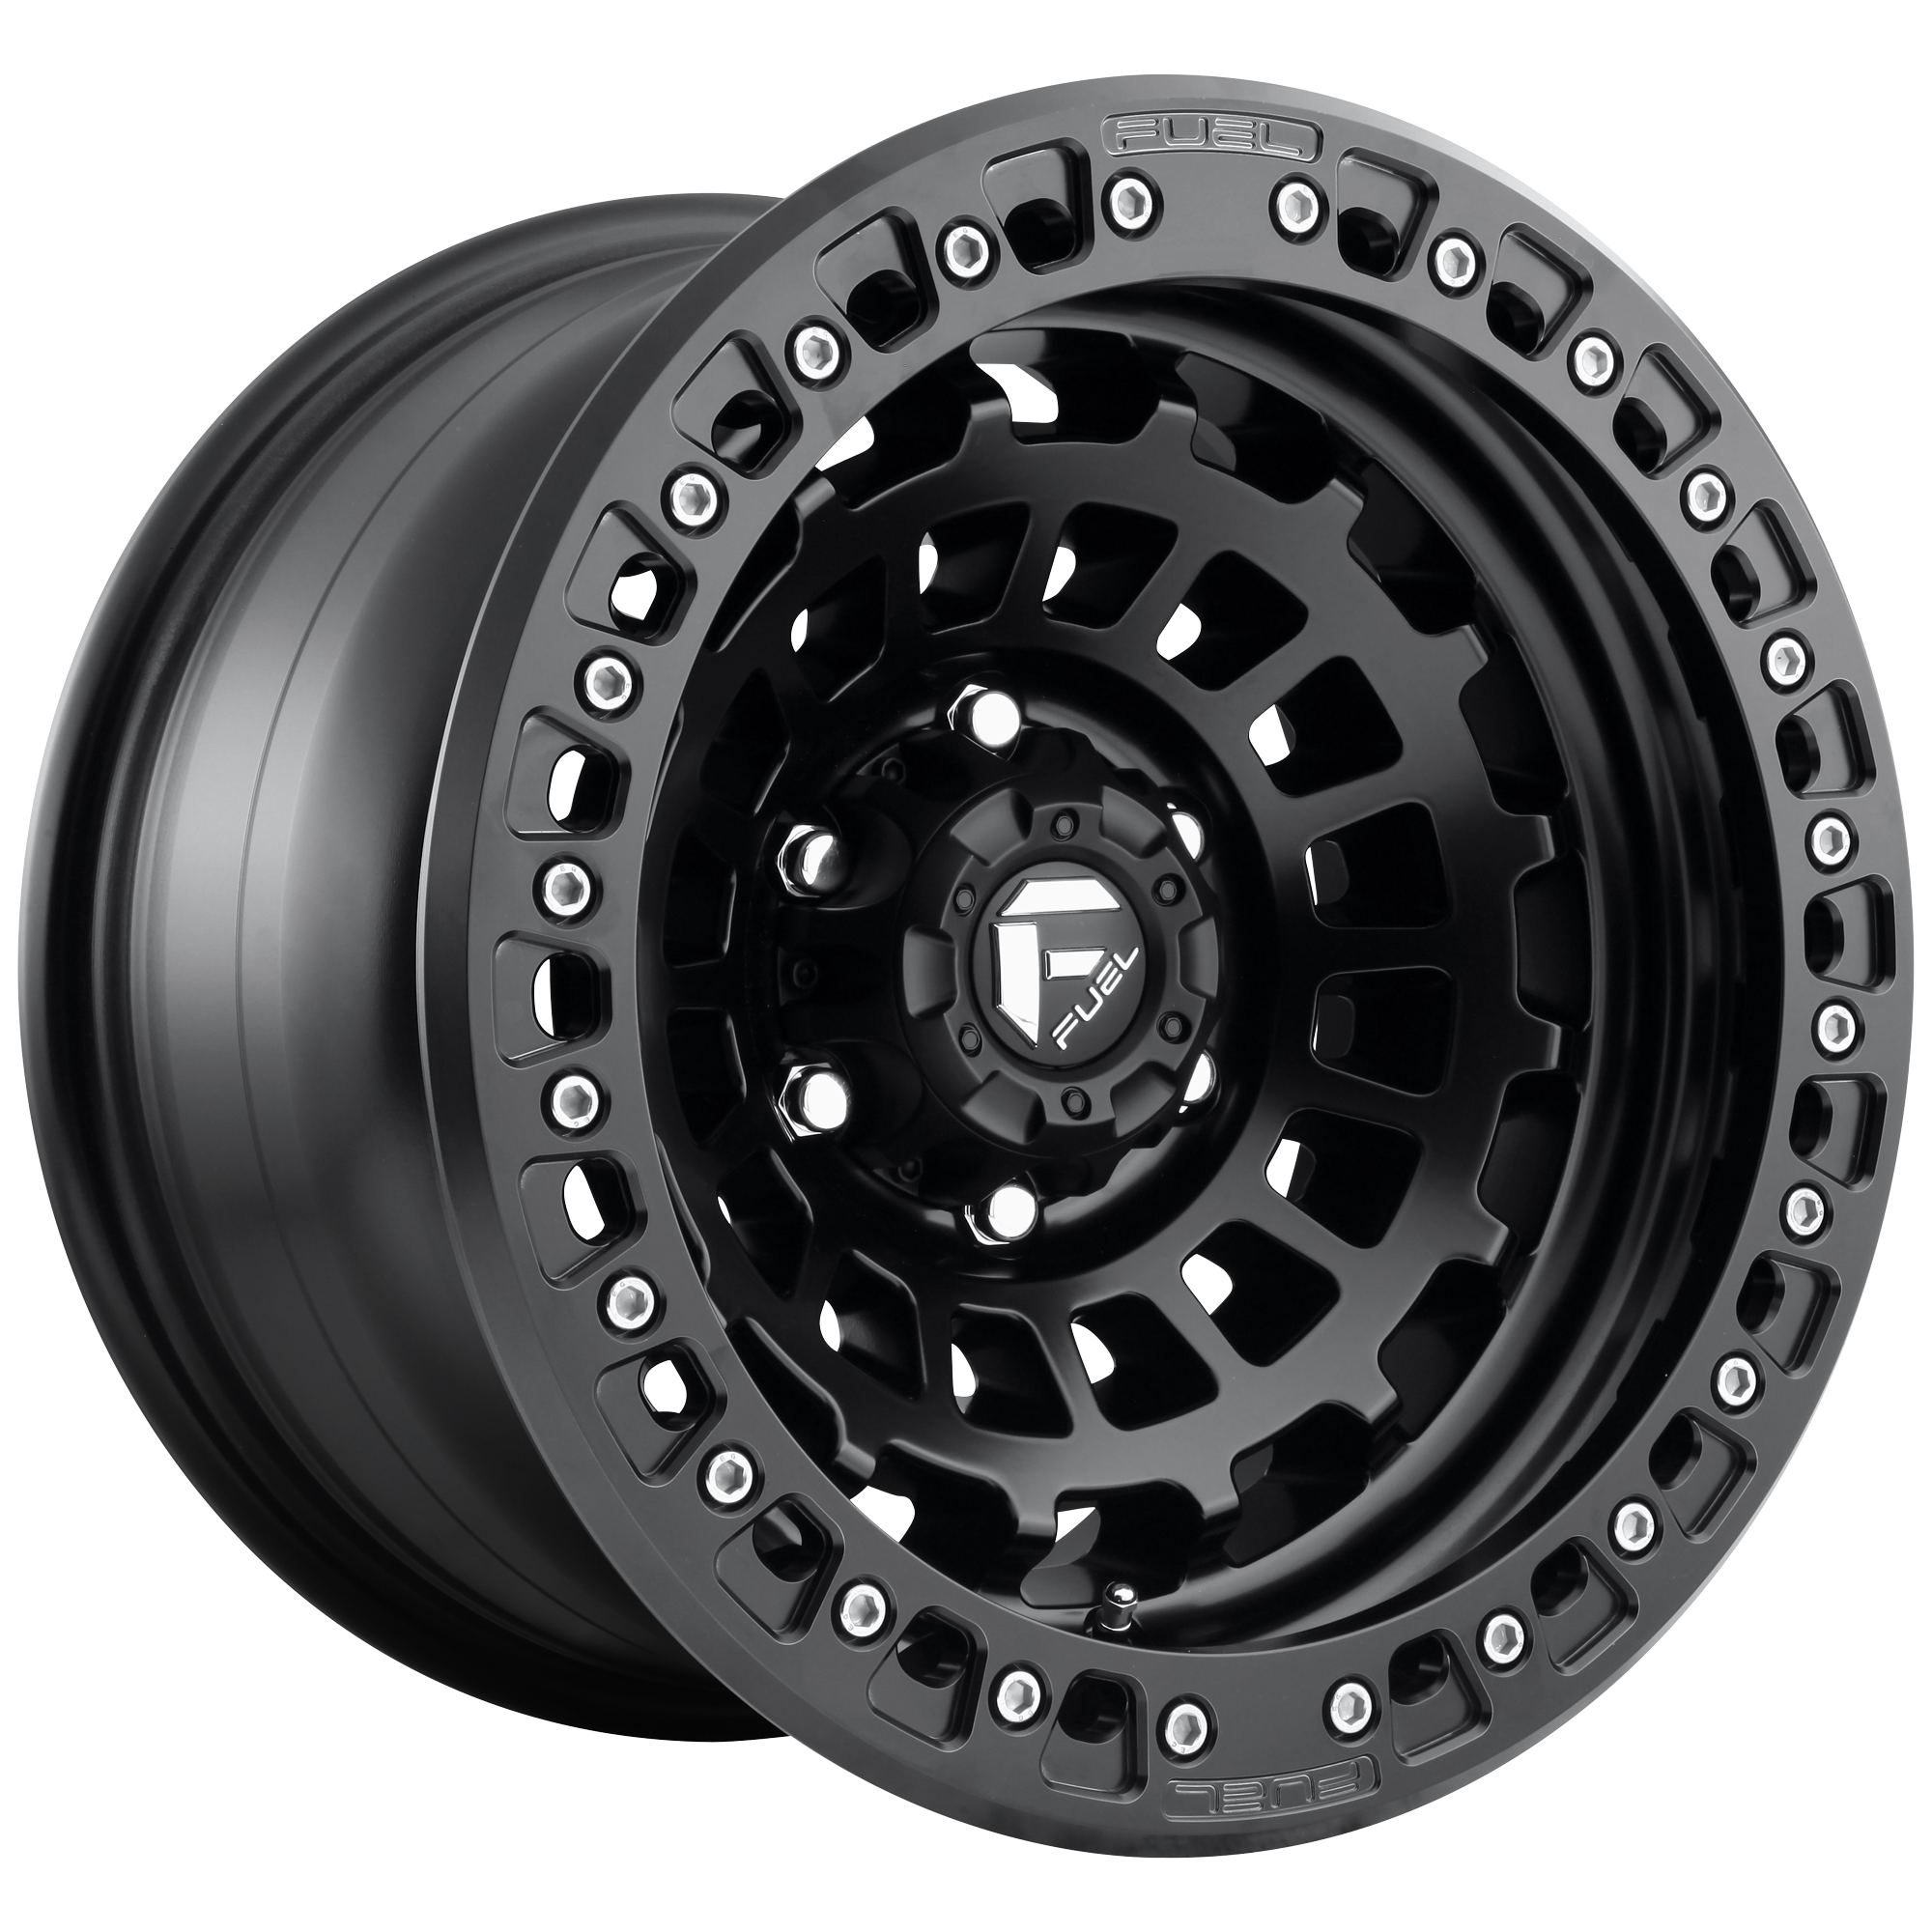 ZEPHYR BL - OFF ROAD ONLY 17x9 5x150.00 MATTE BLACK (-15 mm) - Tires and Engine Performance